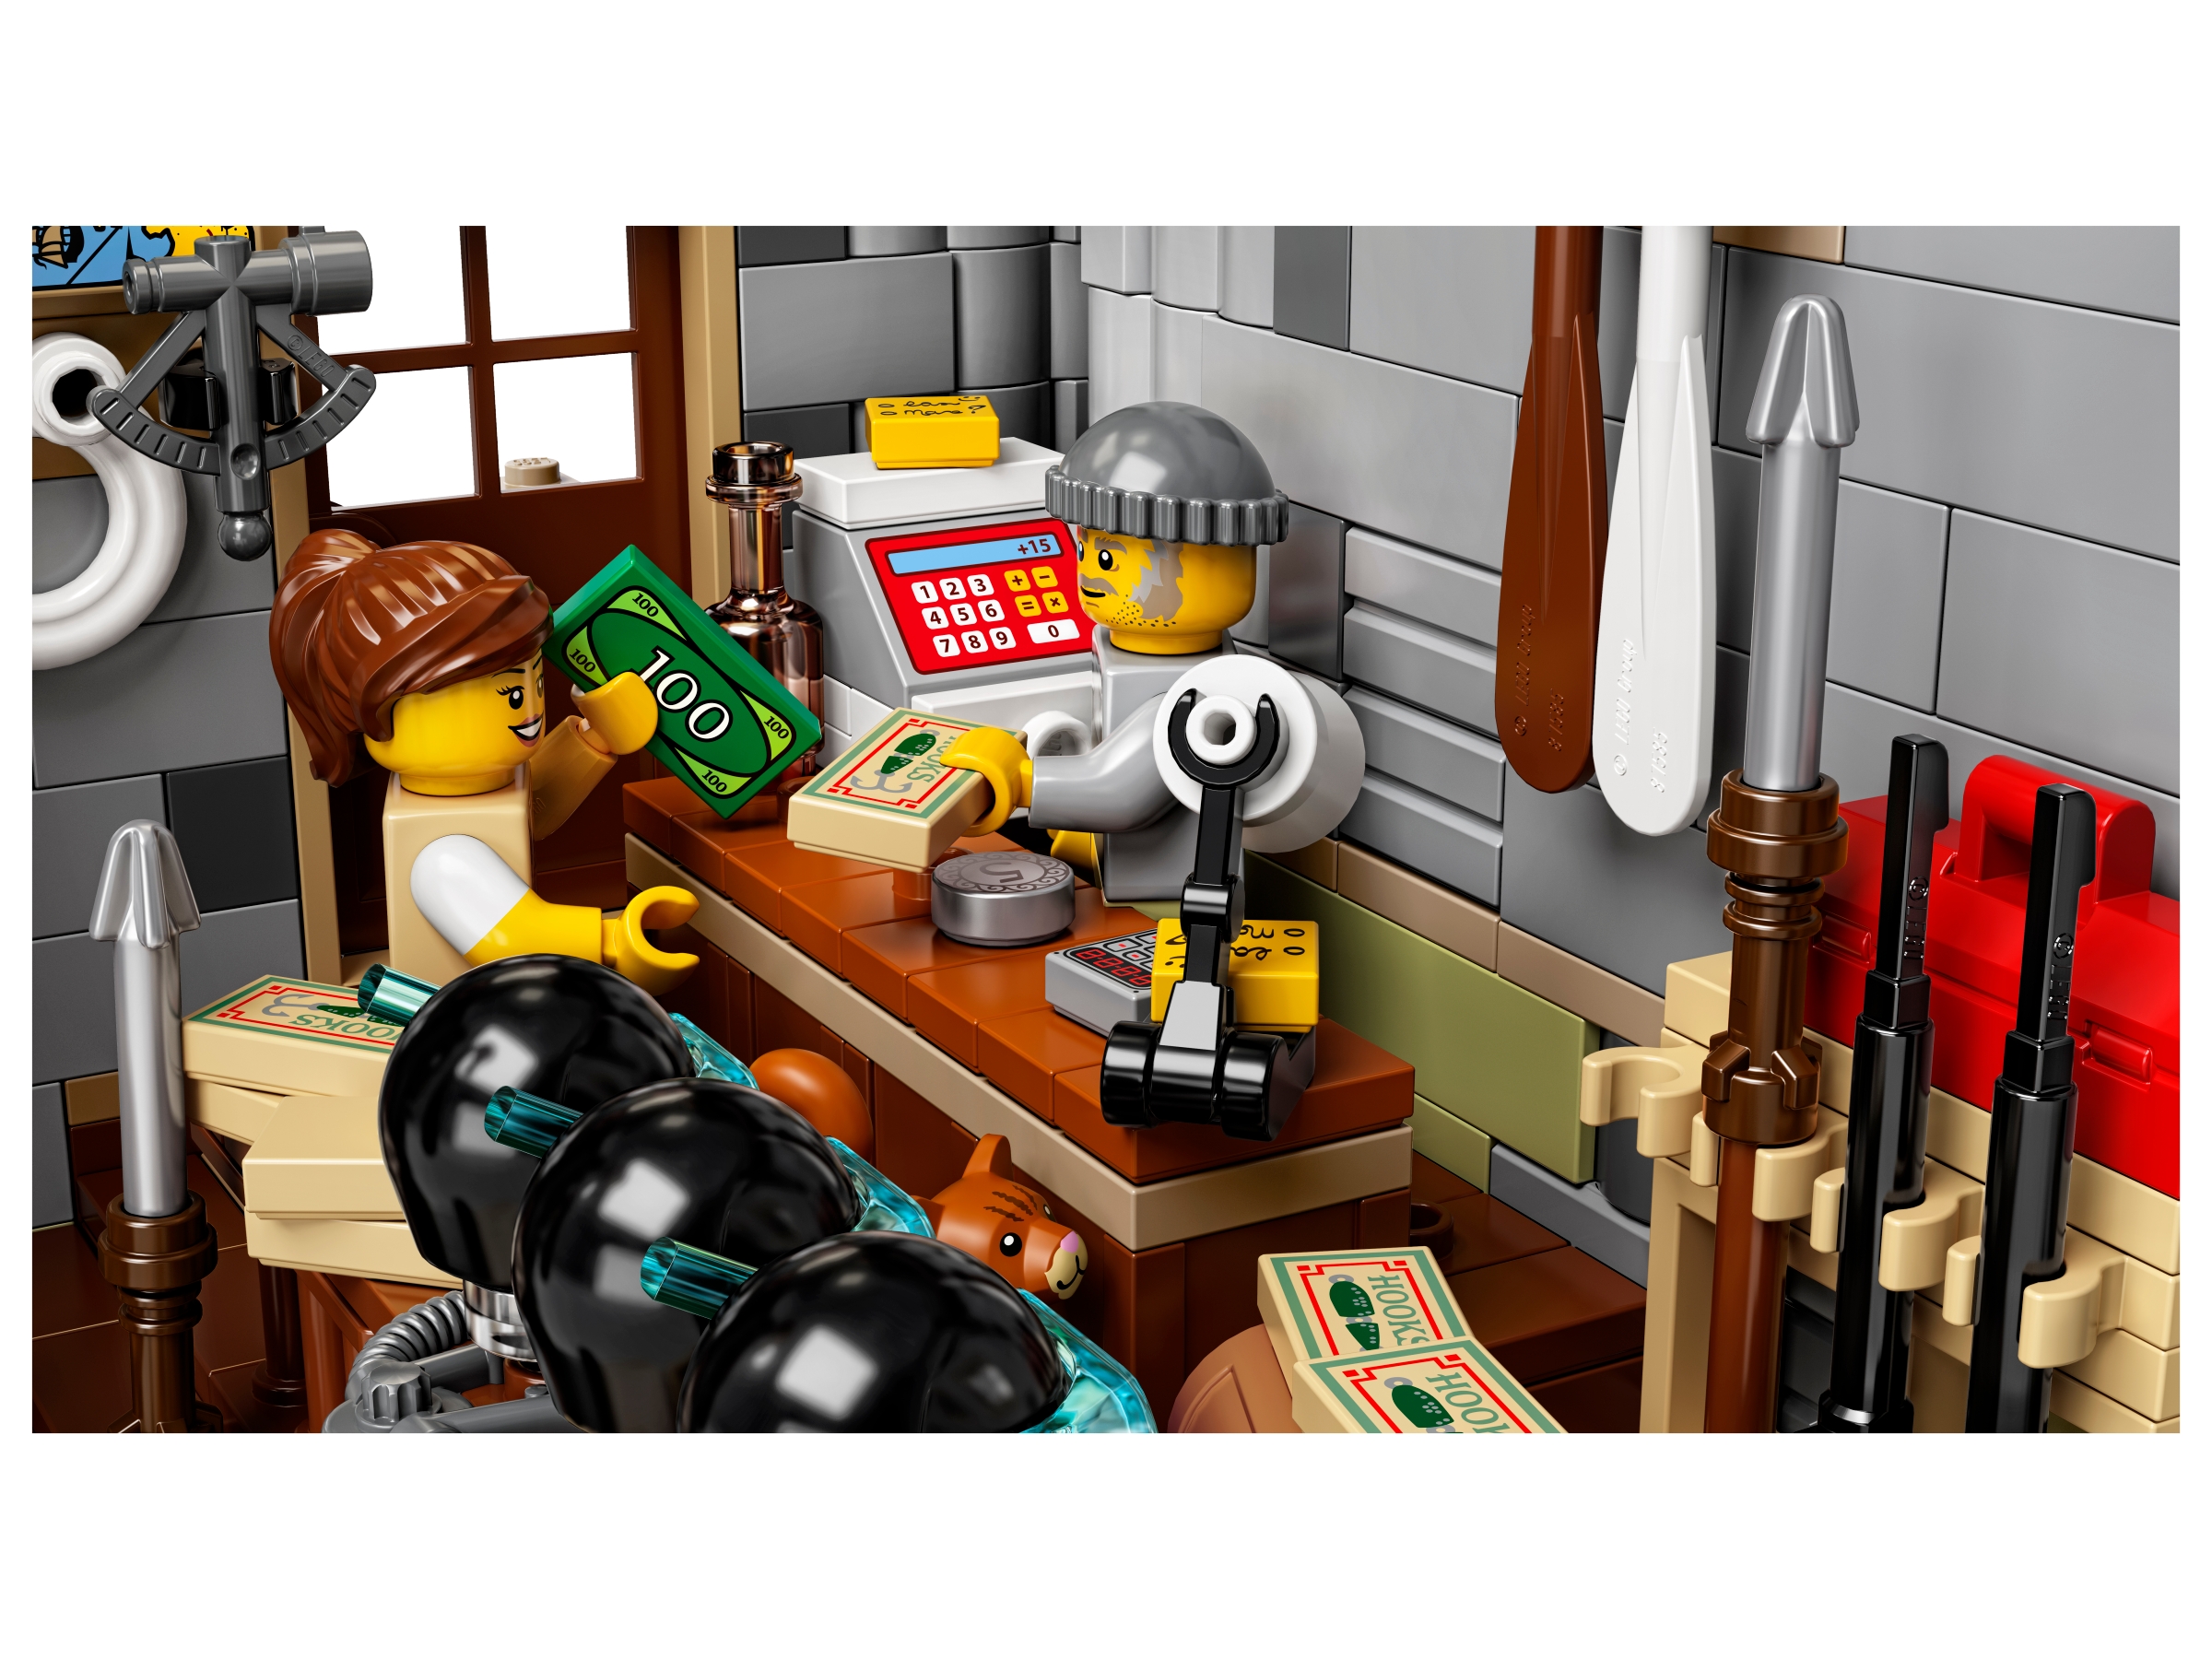 Lego Ideas - Old Fishing Store (21310)